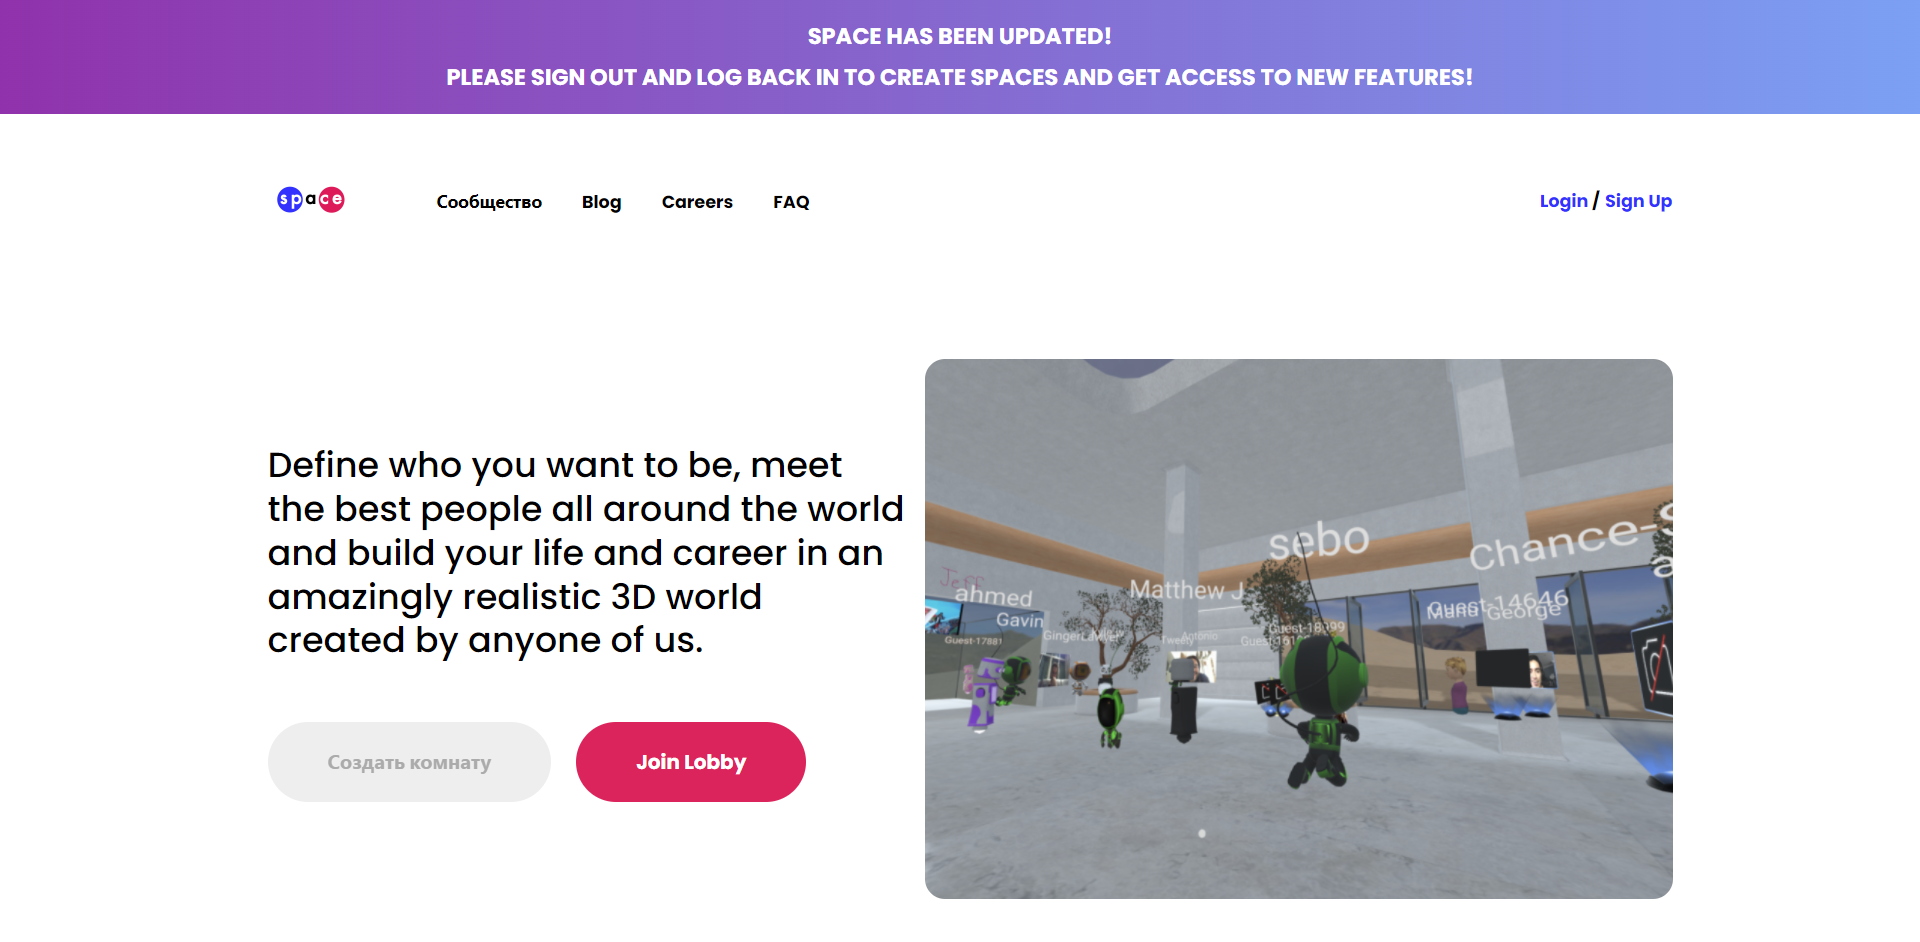 Unsafe At Any Speed exhibition goes live in Metaverse